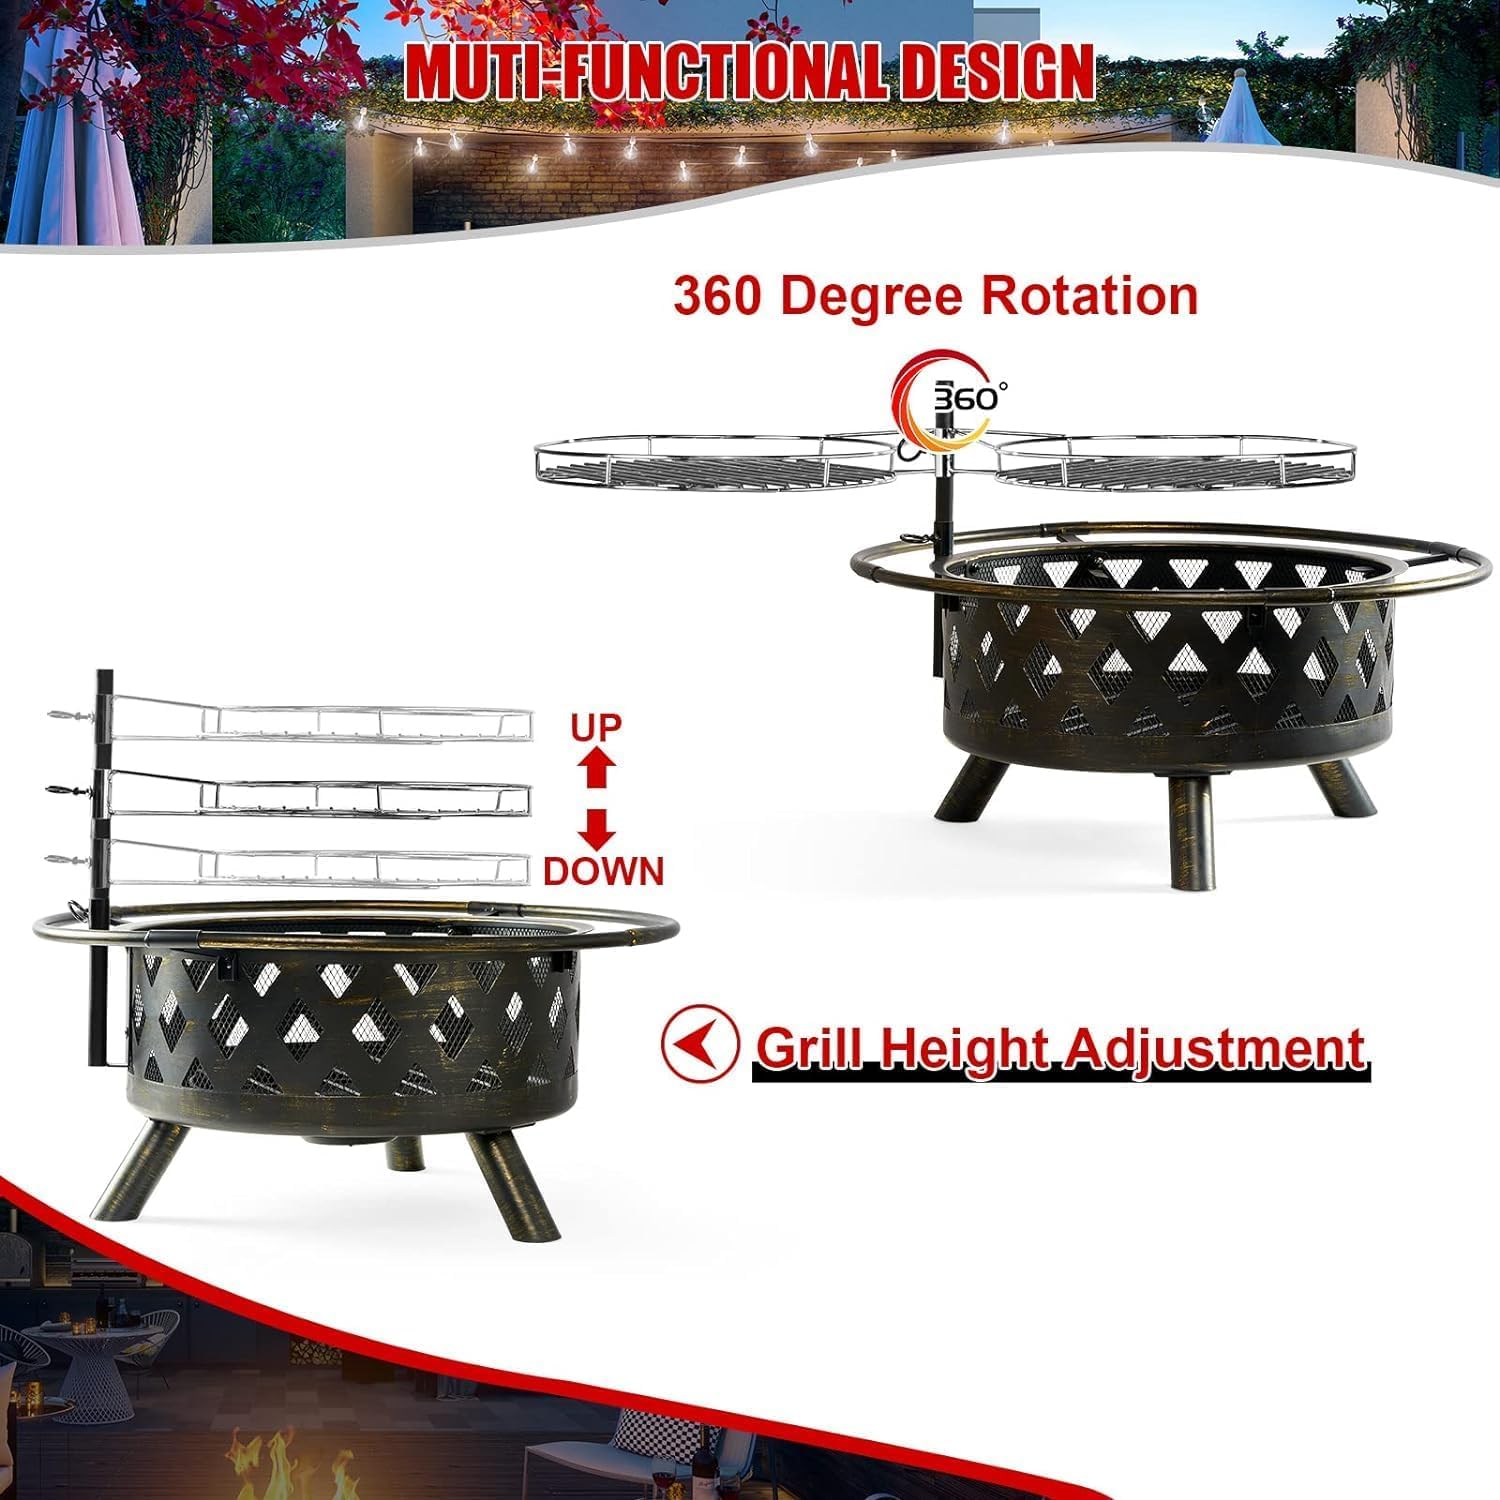 Aoxun Fire Pit 30in with Grill Outdoor Wood Burning 2 in 1 Fire Pit with Fire Poker (Black)